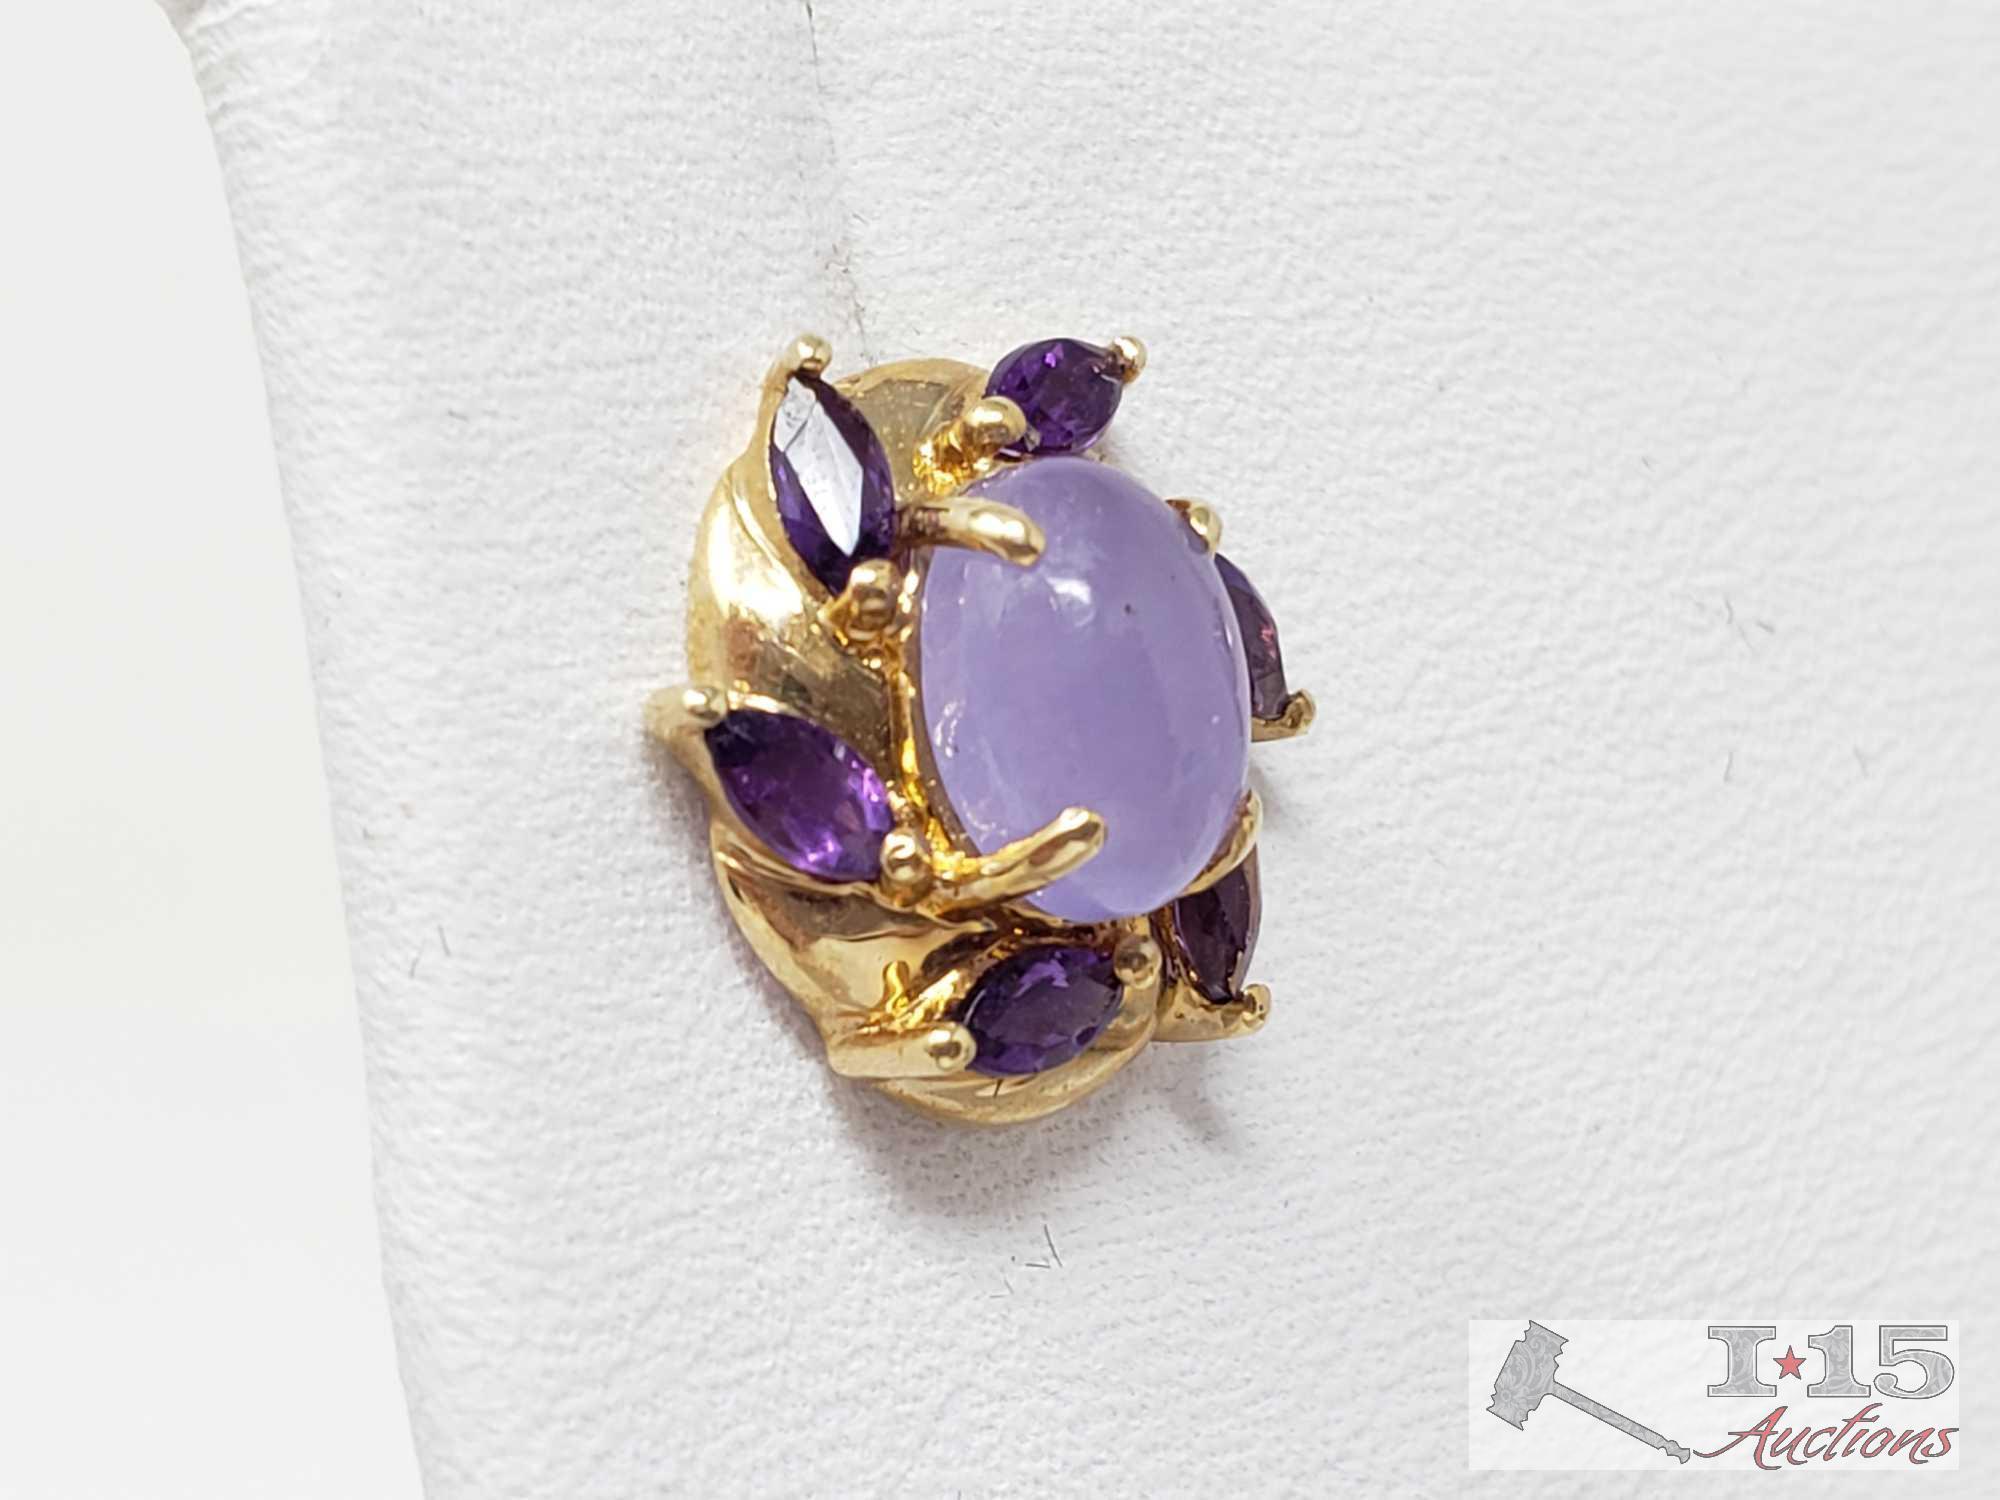 14k Gold Earrings with Amethyst and Lavender Jade, 2.8g